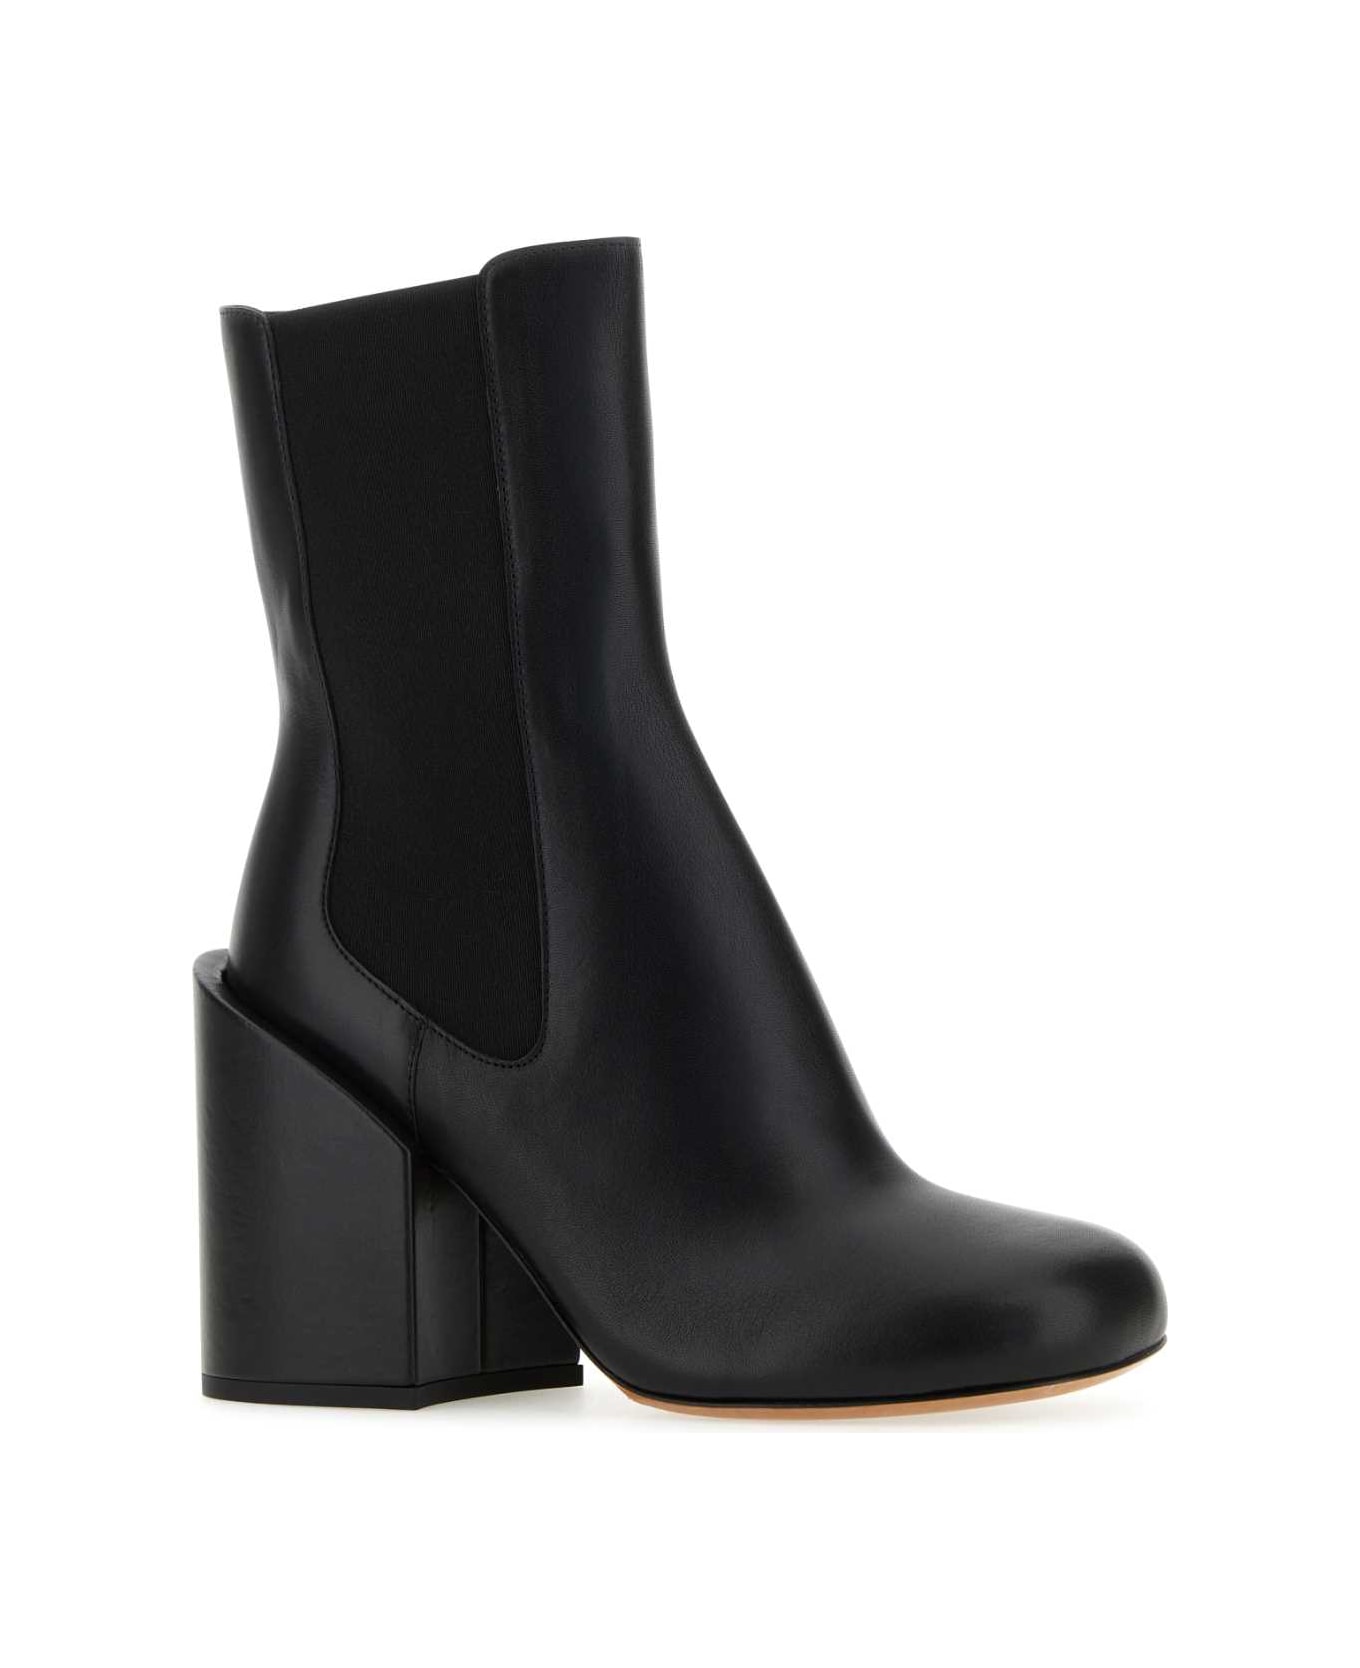 SportMax Black Leather Etra Ankle Boots - NERO